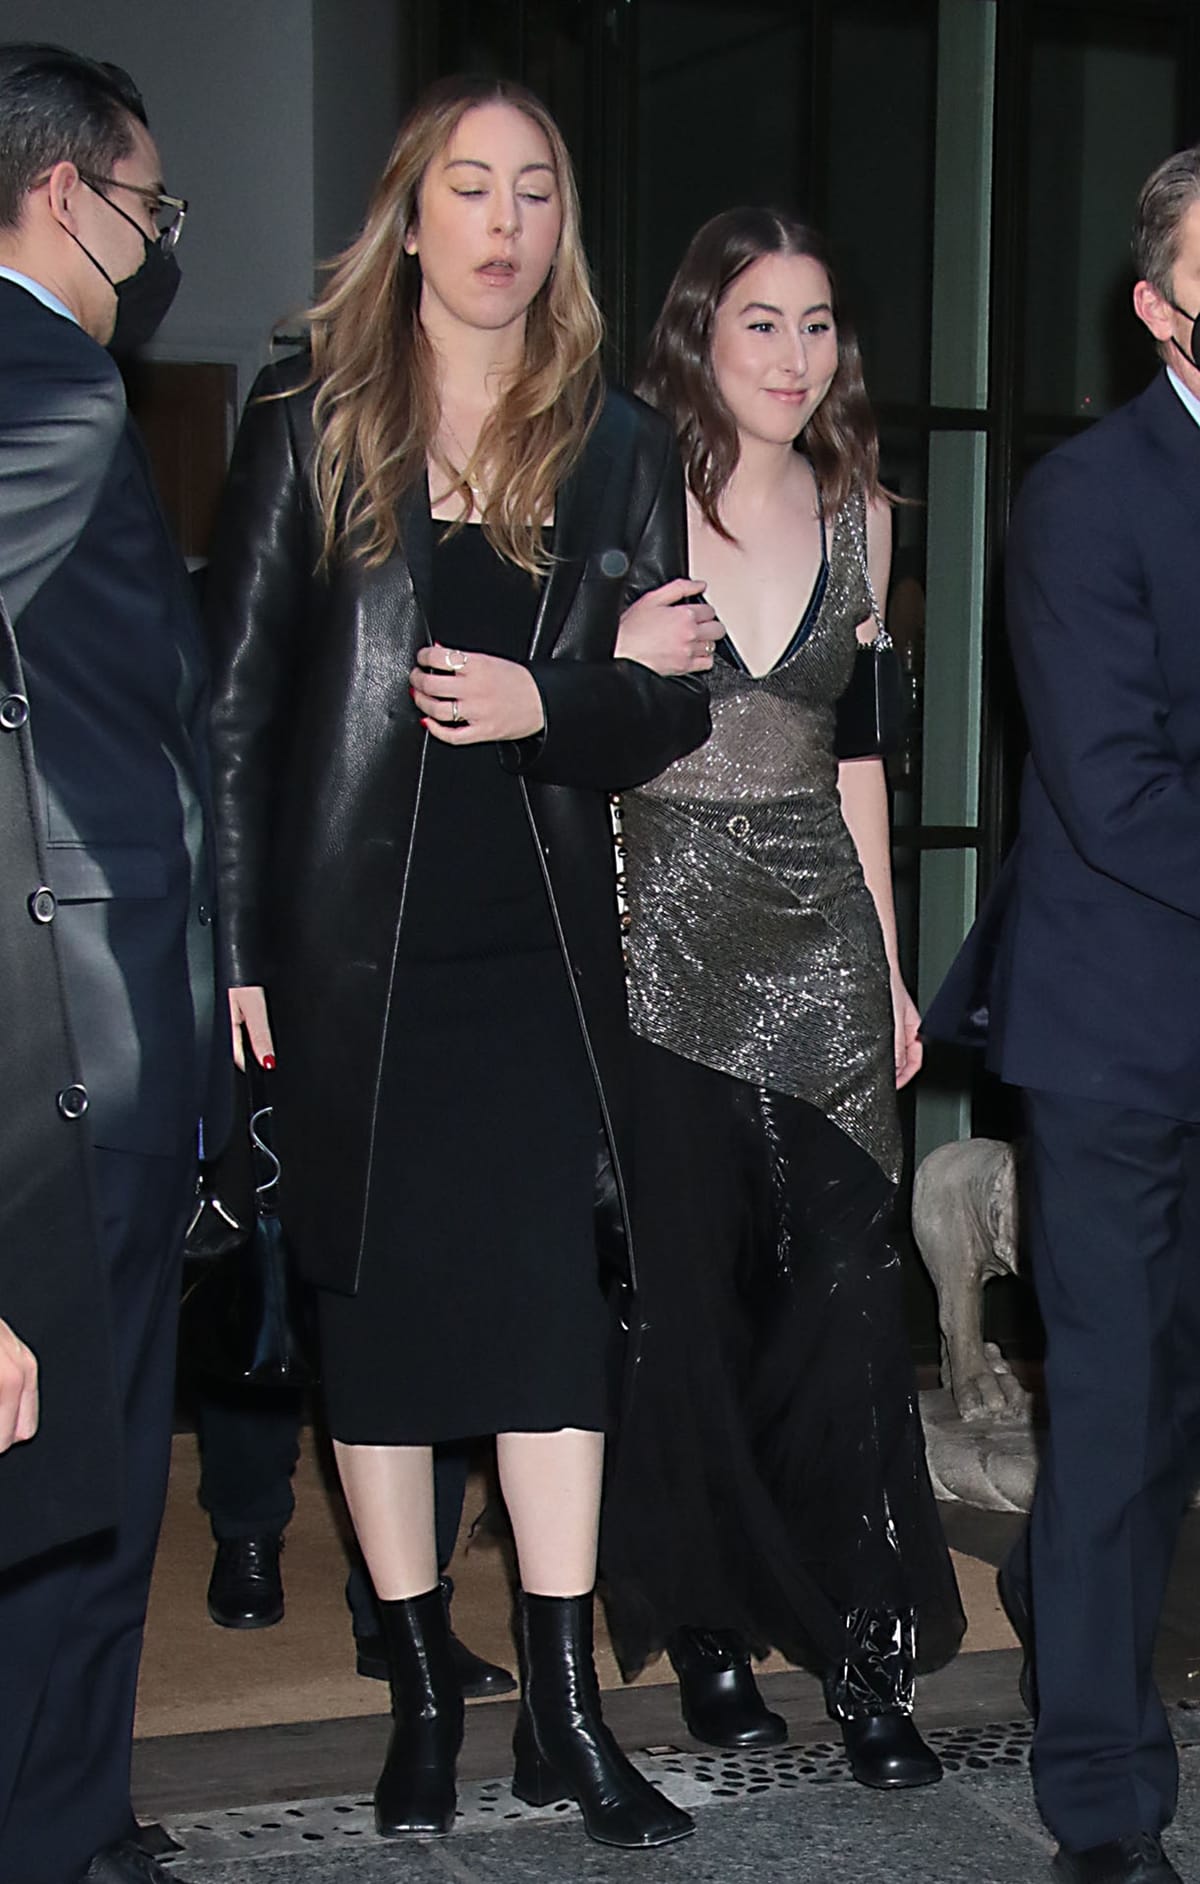 Alana Haim arrives with her sister Este to promote Licorice Pizza during an appearance on Late Night with Seth Meyers